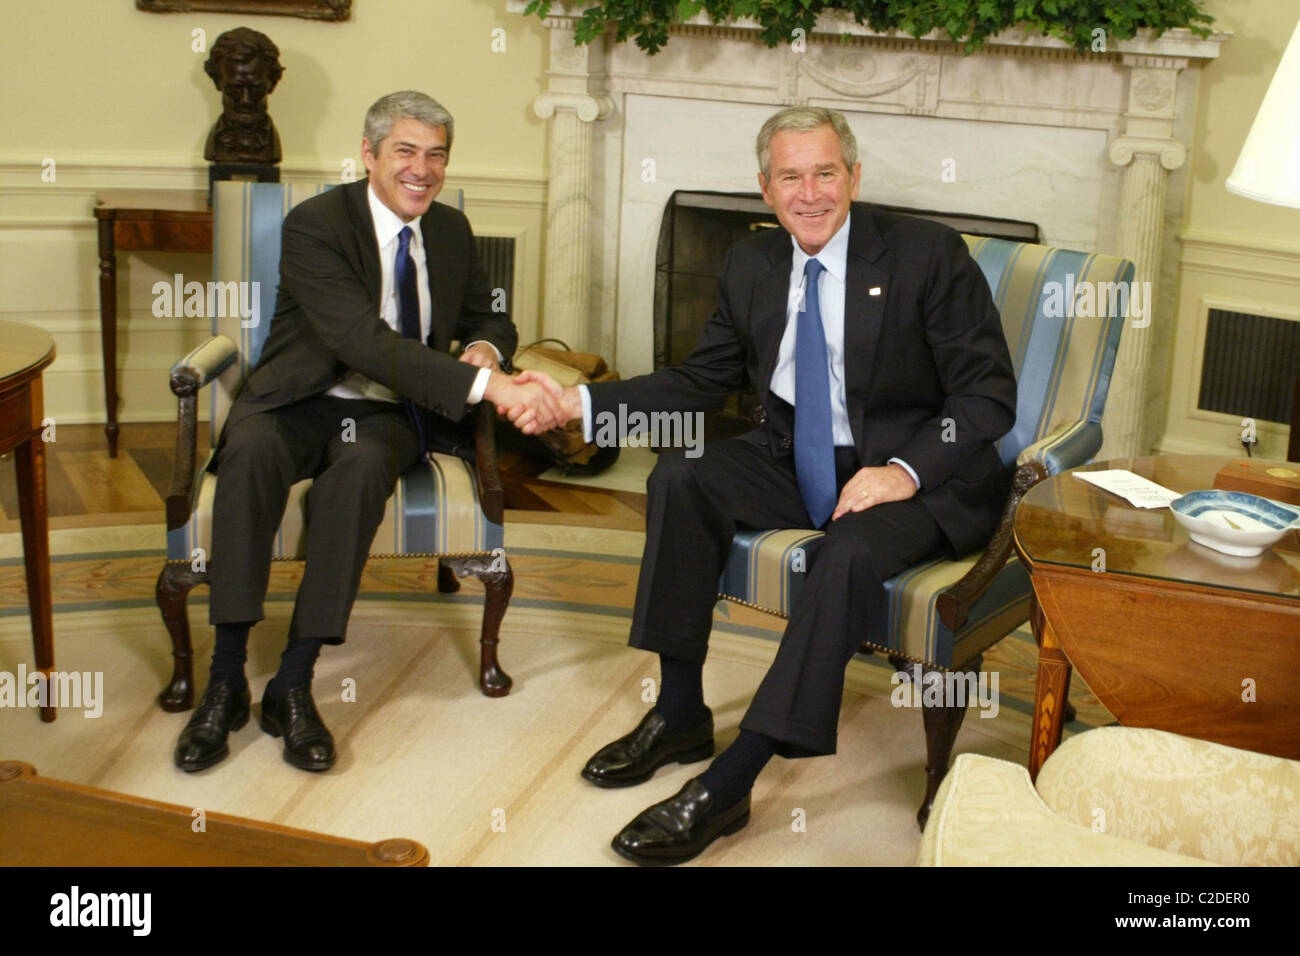 US President George W Bush welcomes Portugal Prime Minister Jose Socrates at the White House Oval Office Washington DC, USA - Stock Photo